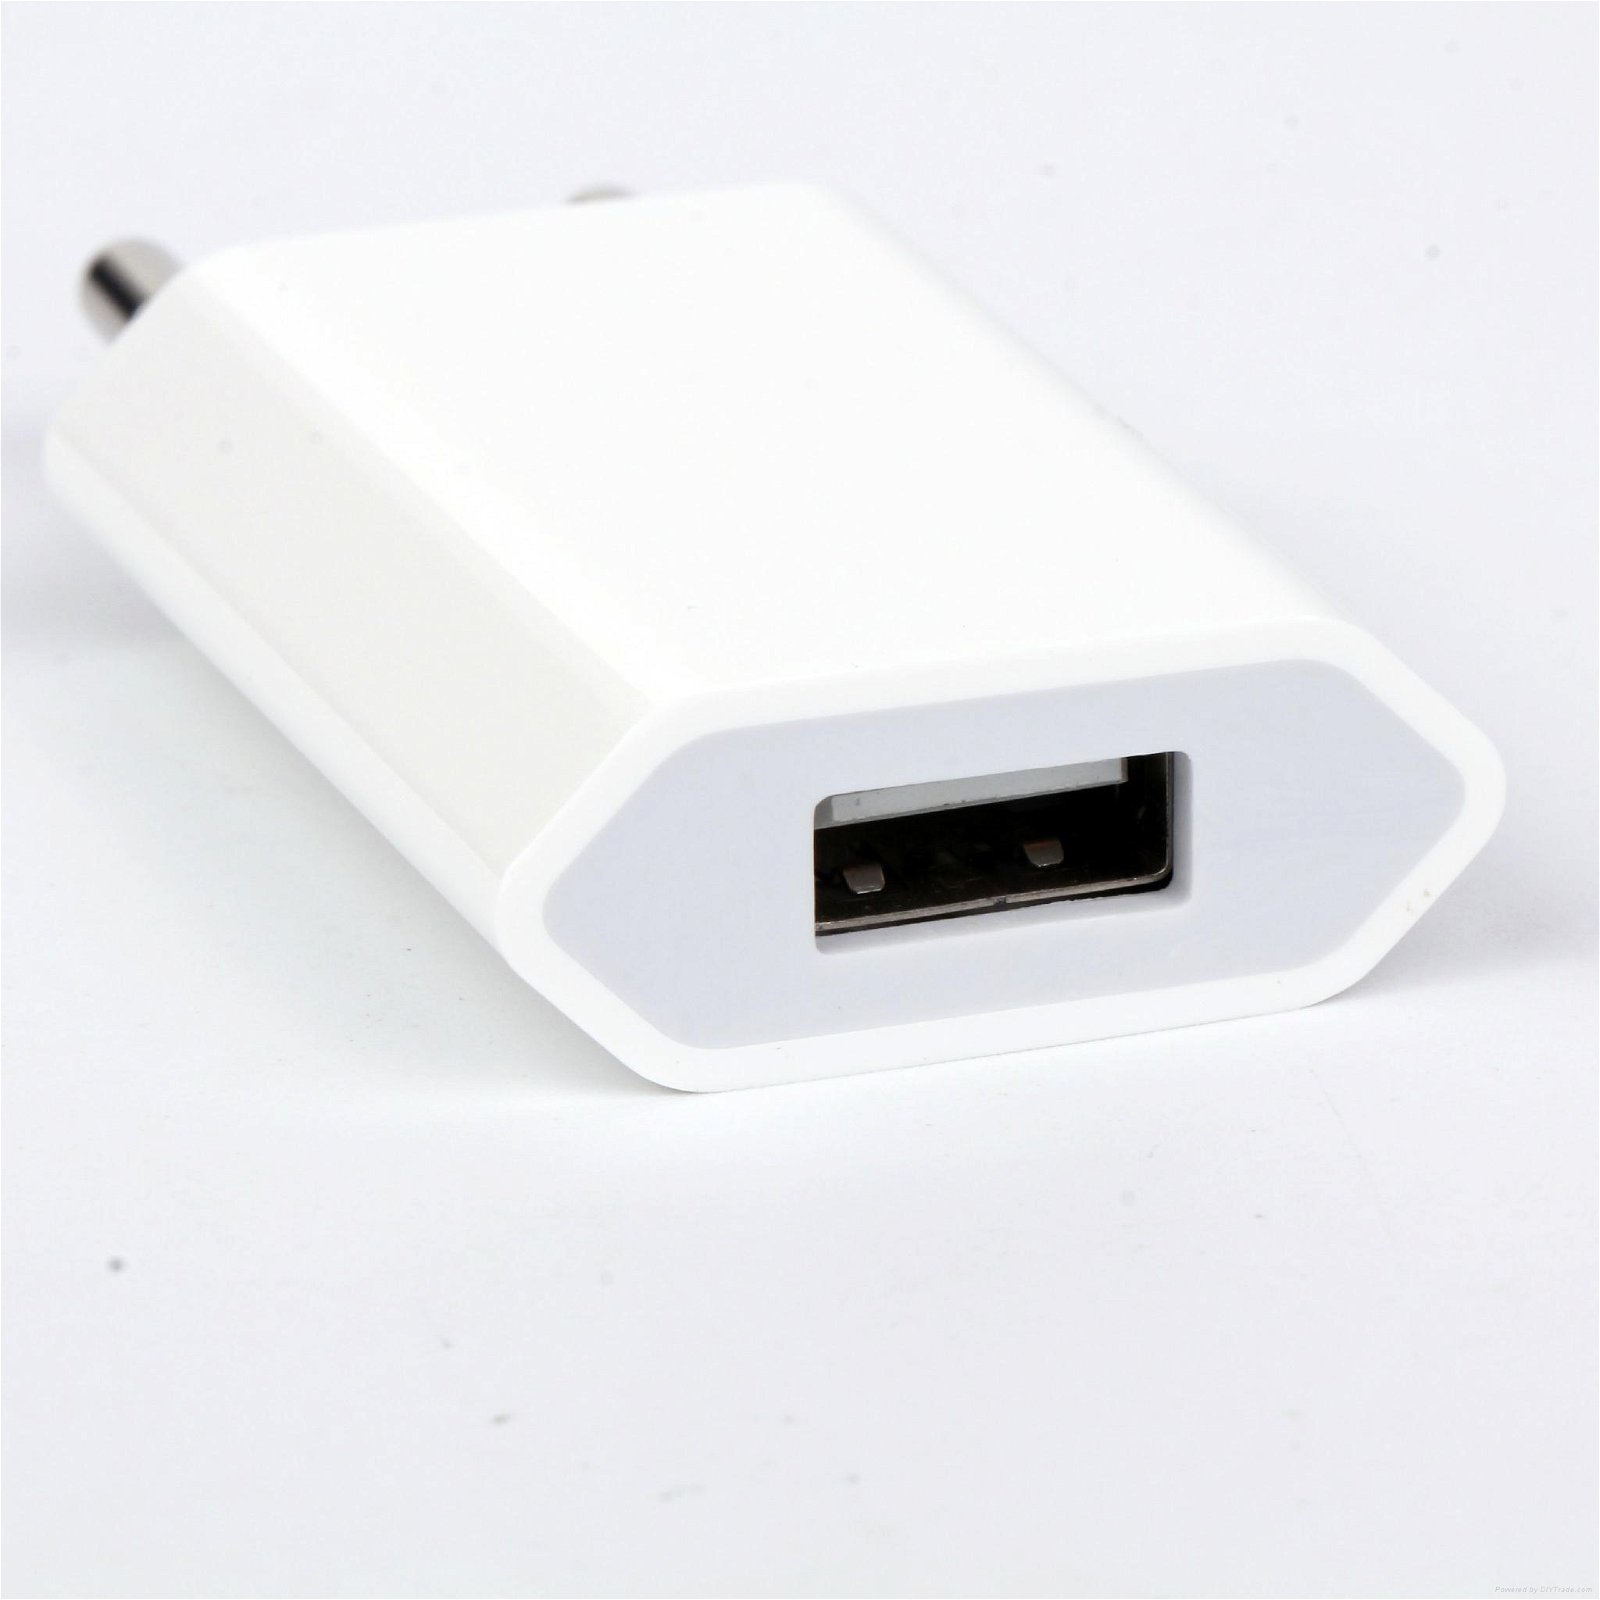 A1400 EU 2-Pin Wall Charger USB Adapter for iPhone 3